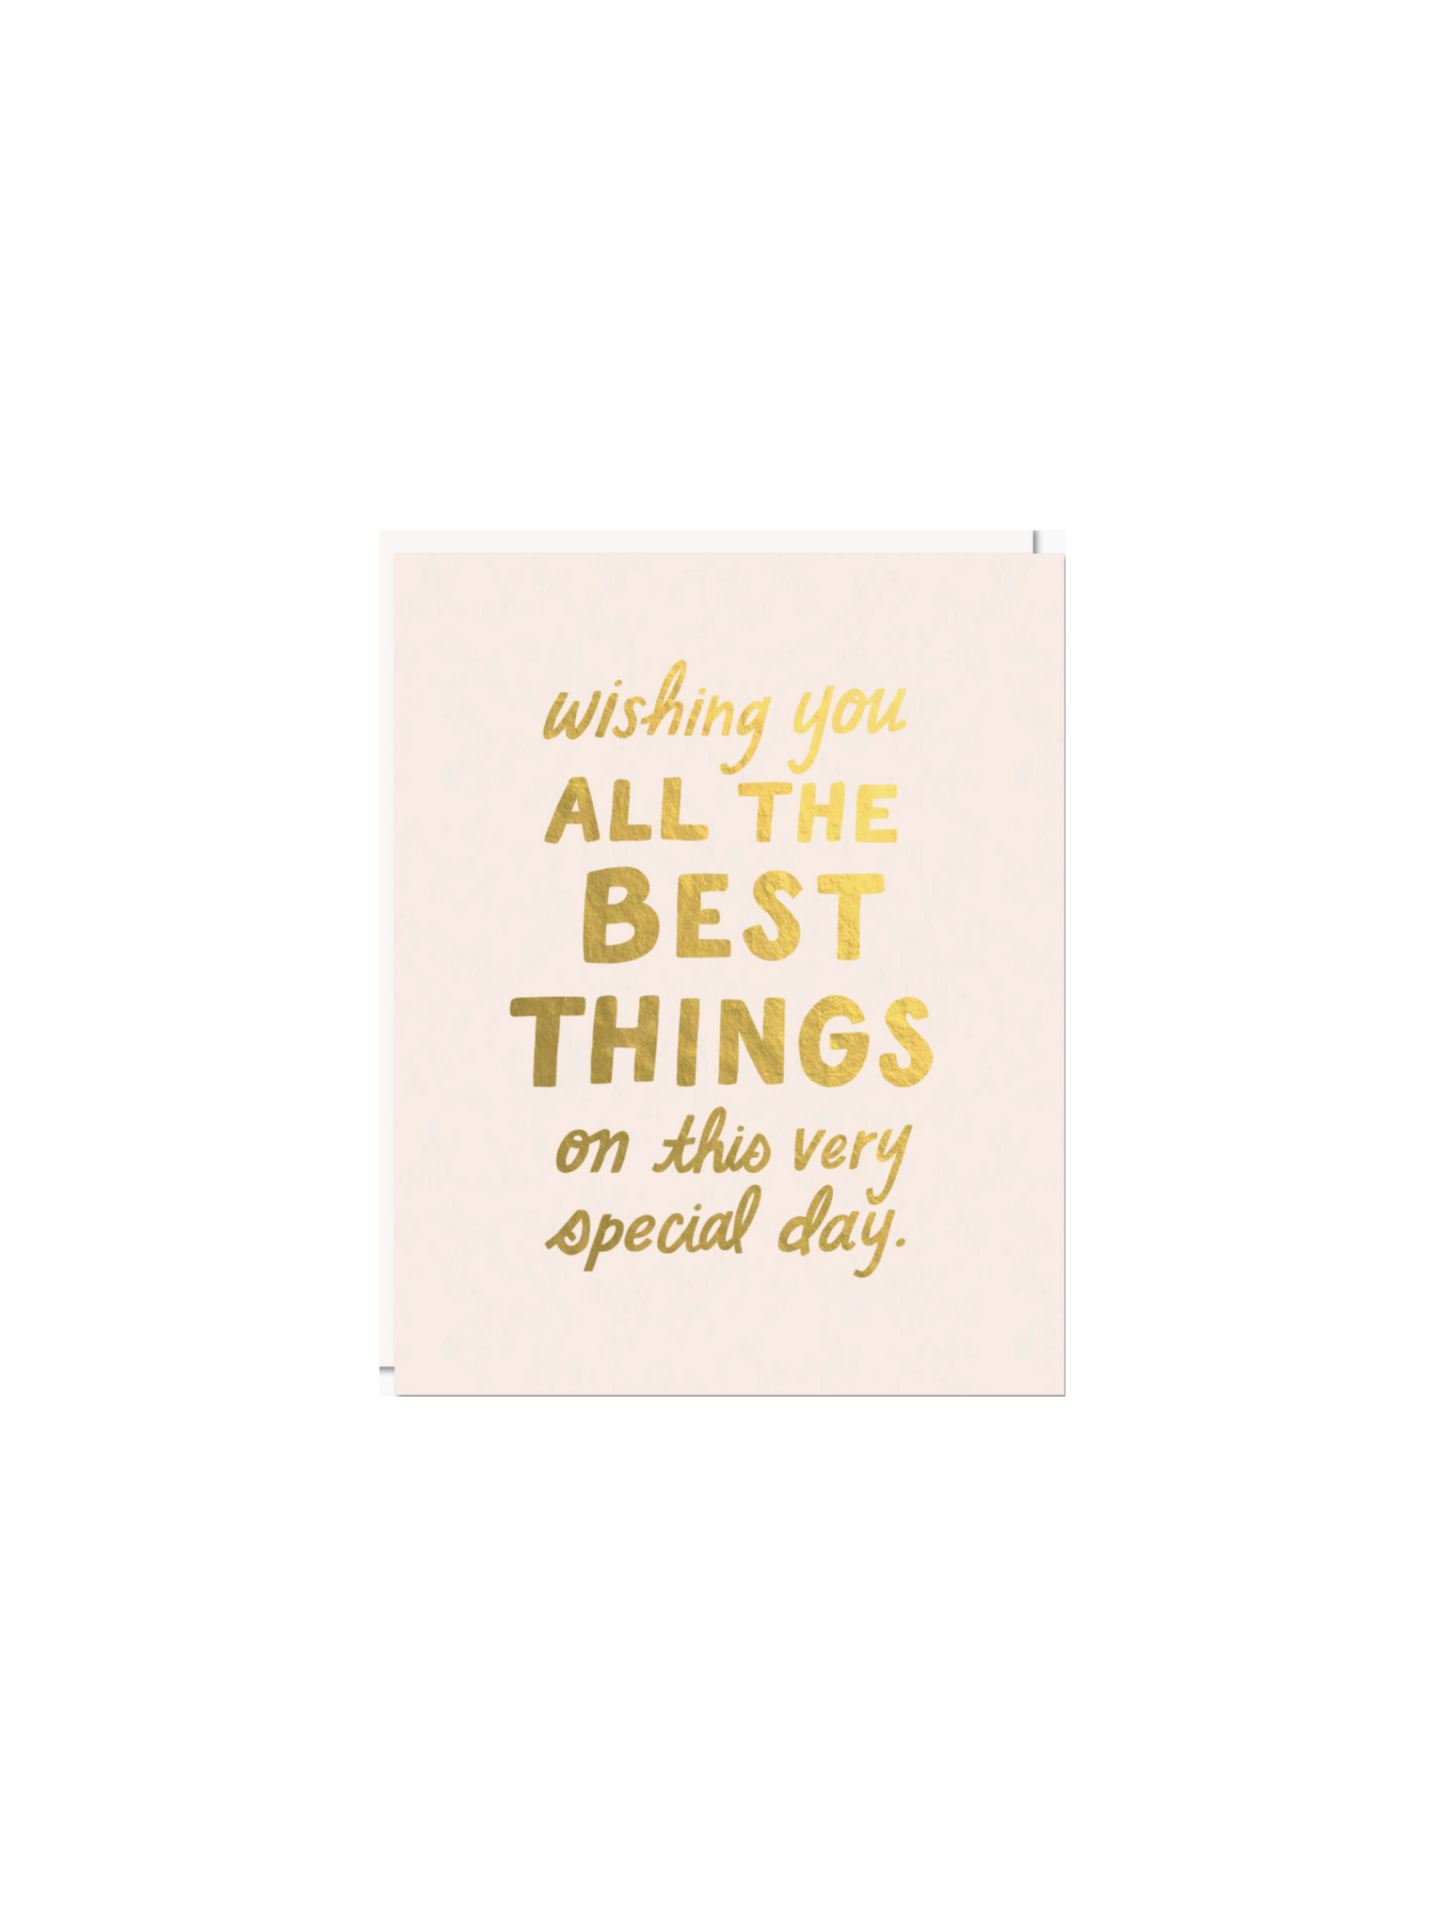 All the Best Things Card